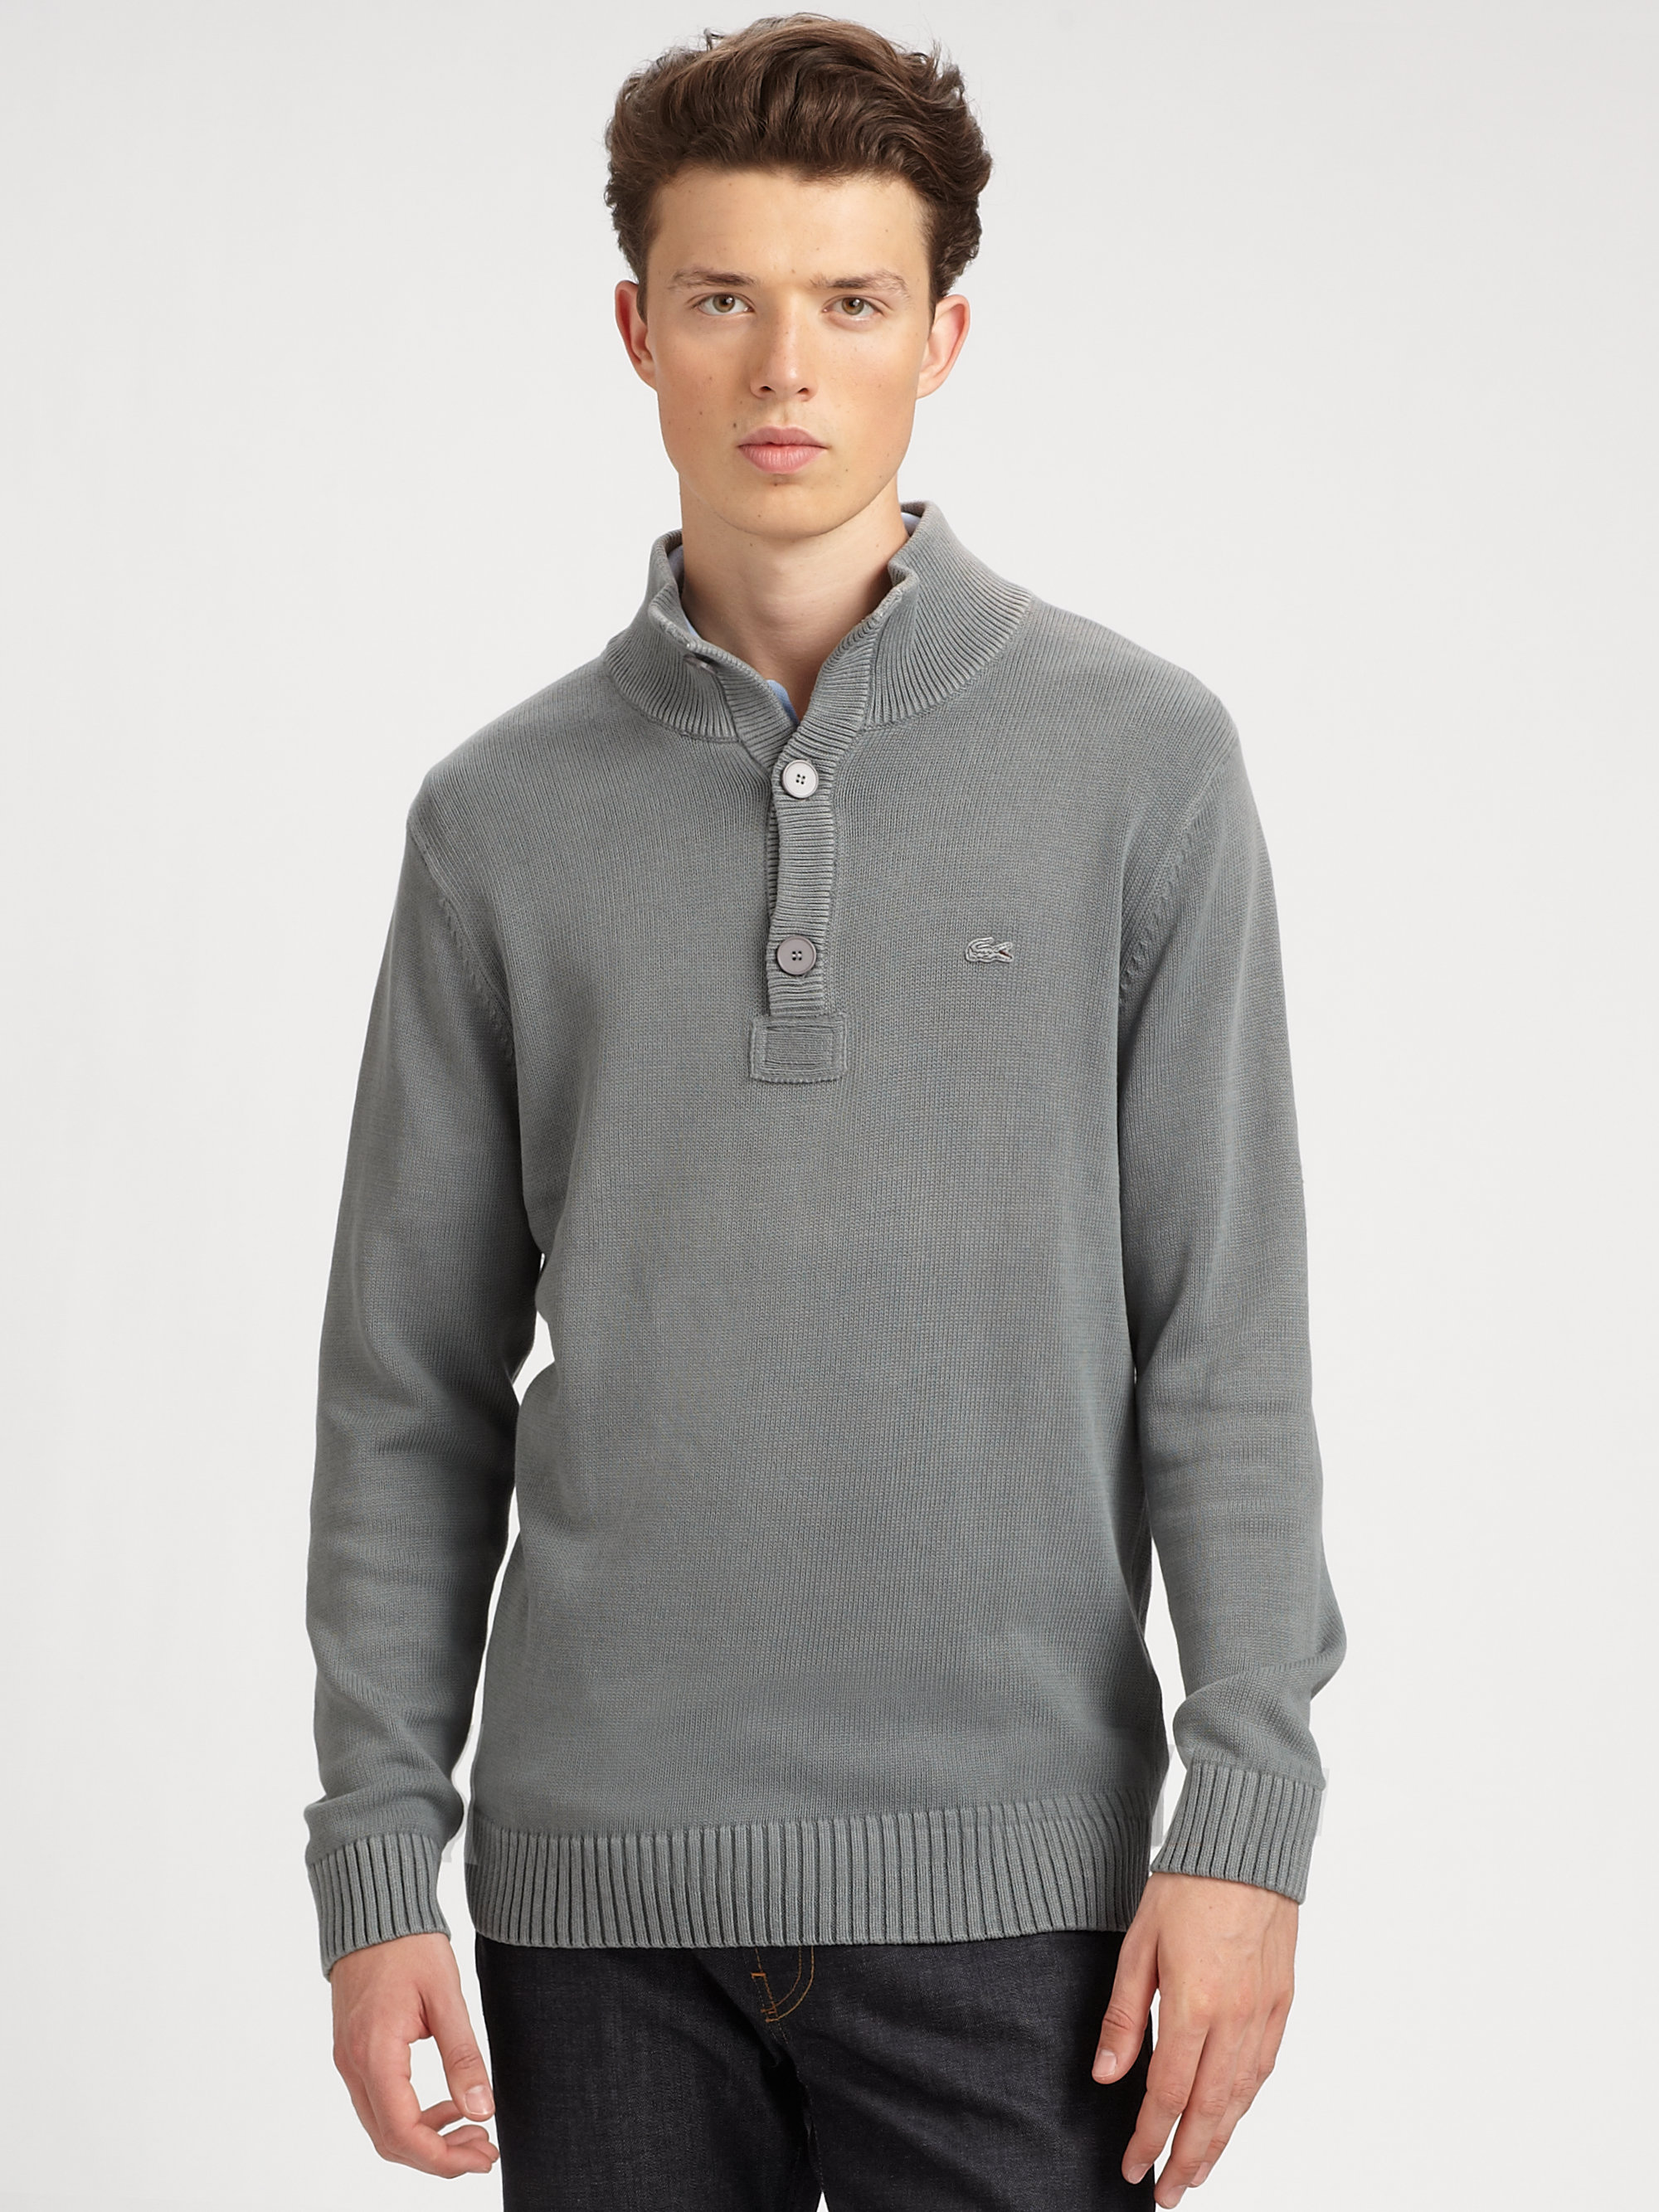 Lyst - Lacoste Vintage Washed Buttonneck Sweater in Blue for Men